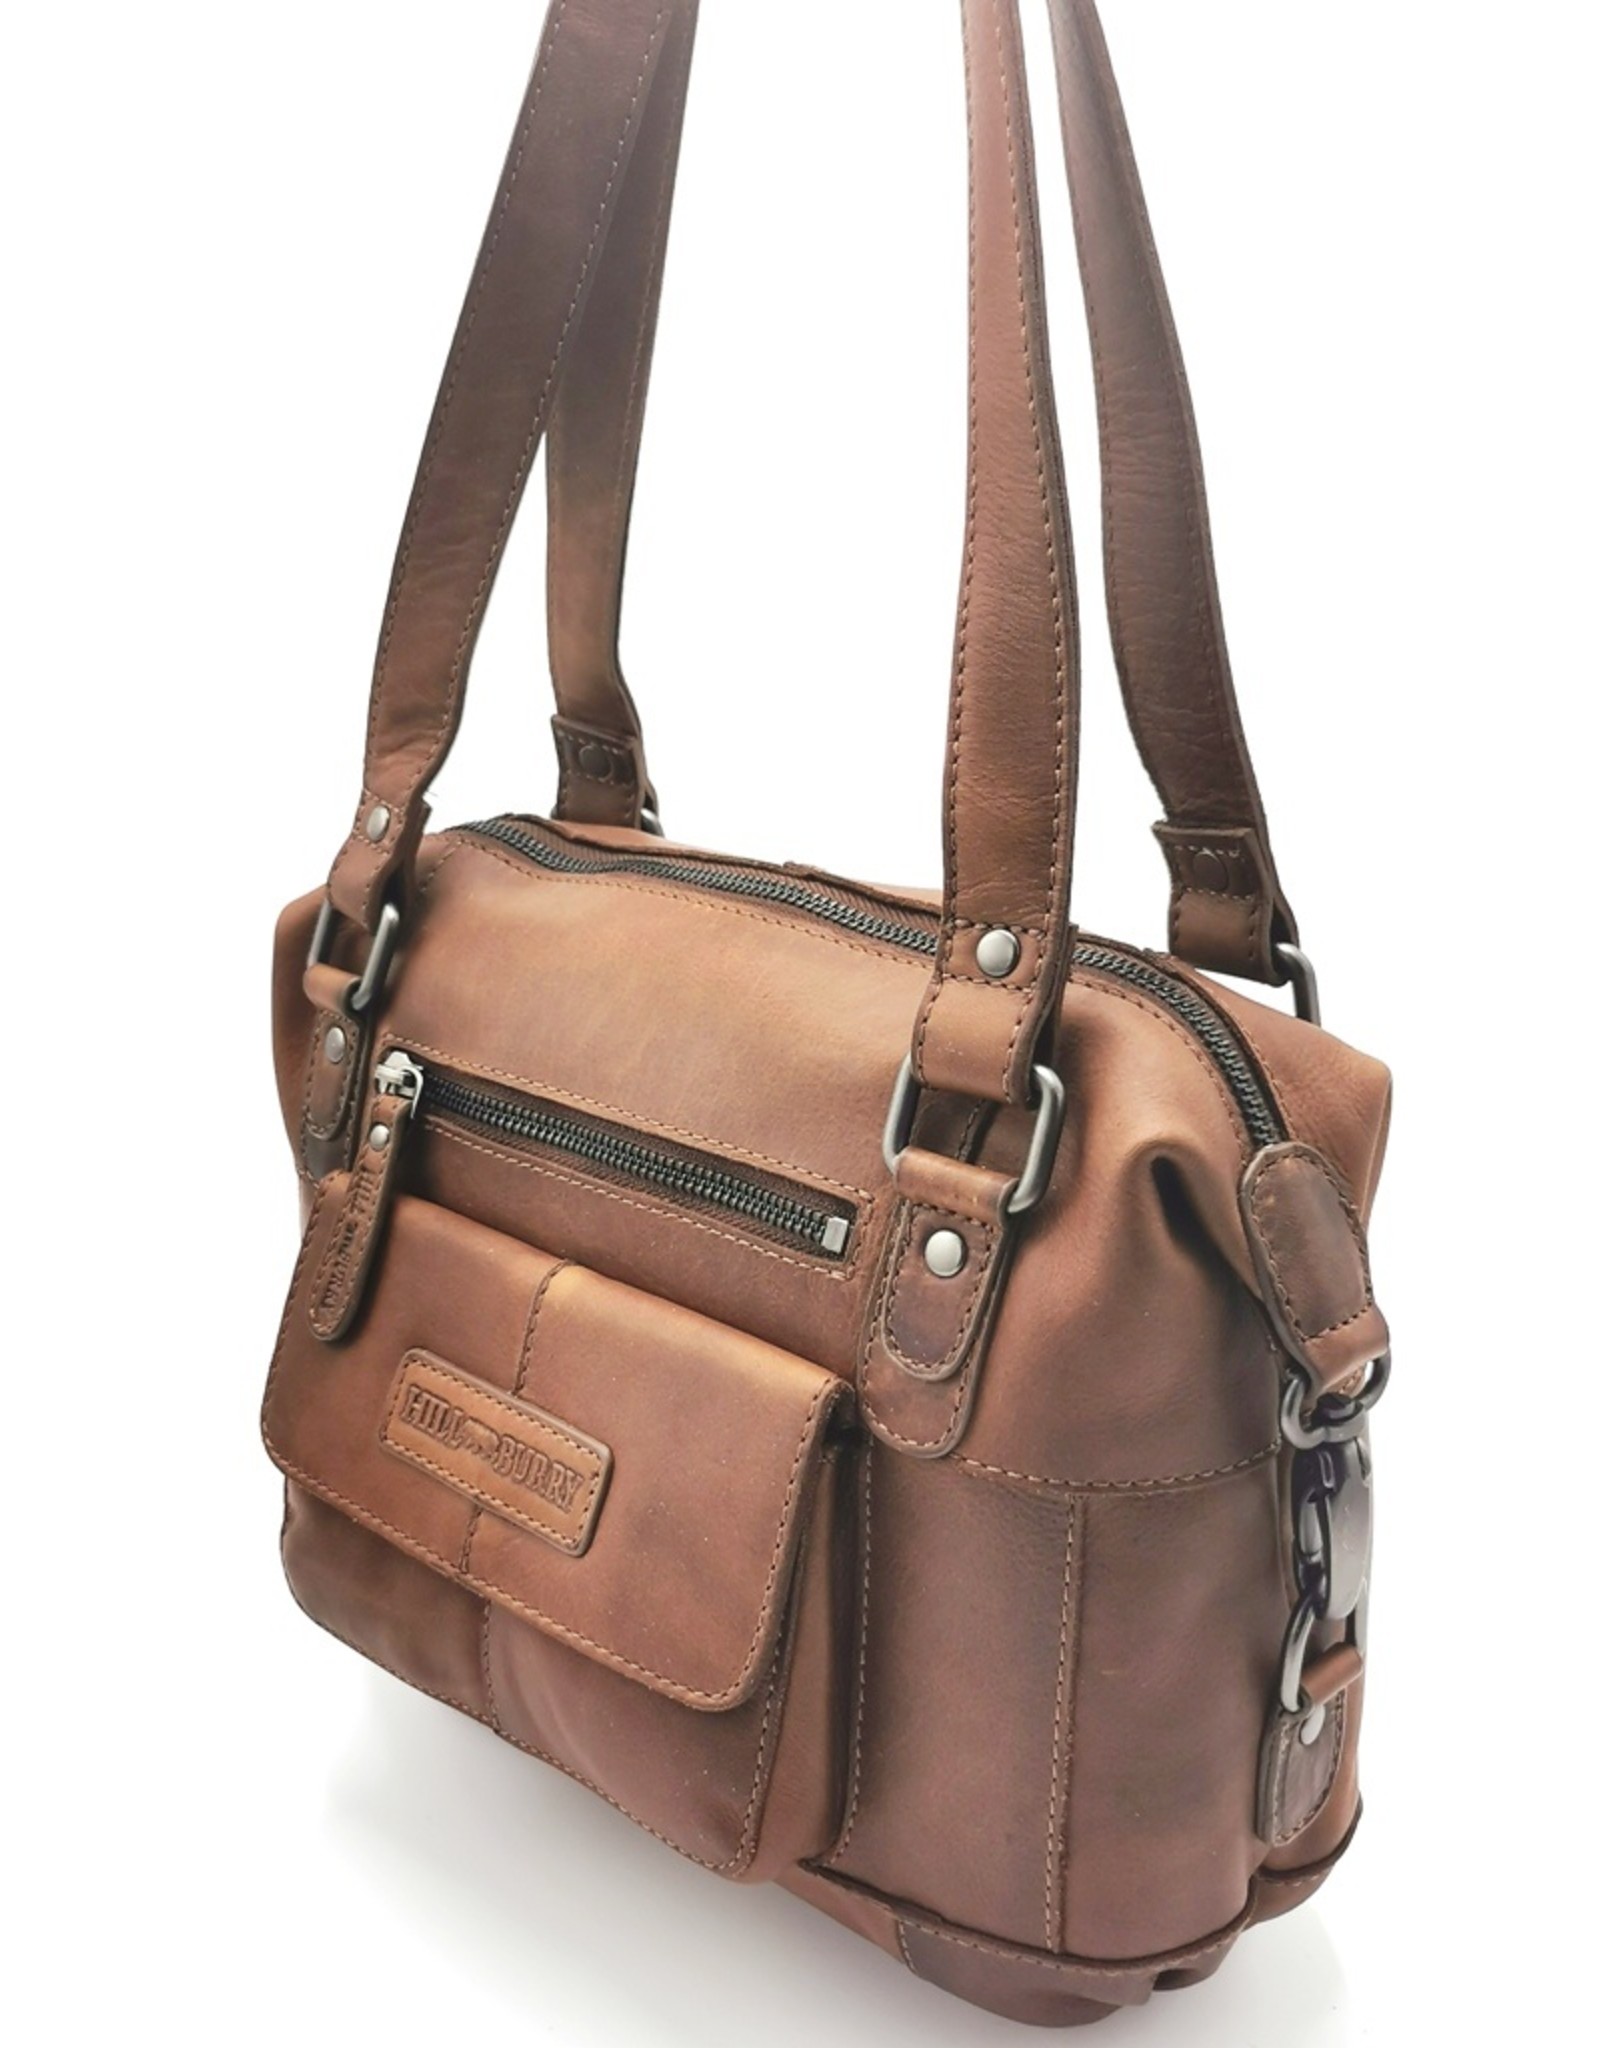 HillBurry Leather Shoulder bags  Leather crossbody bags - HillBurry Leather shoulder bag with long handles brown